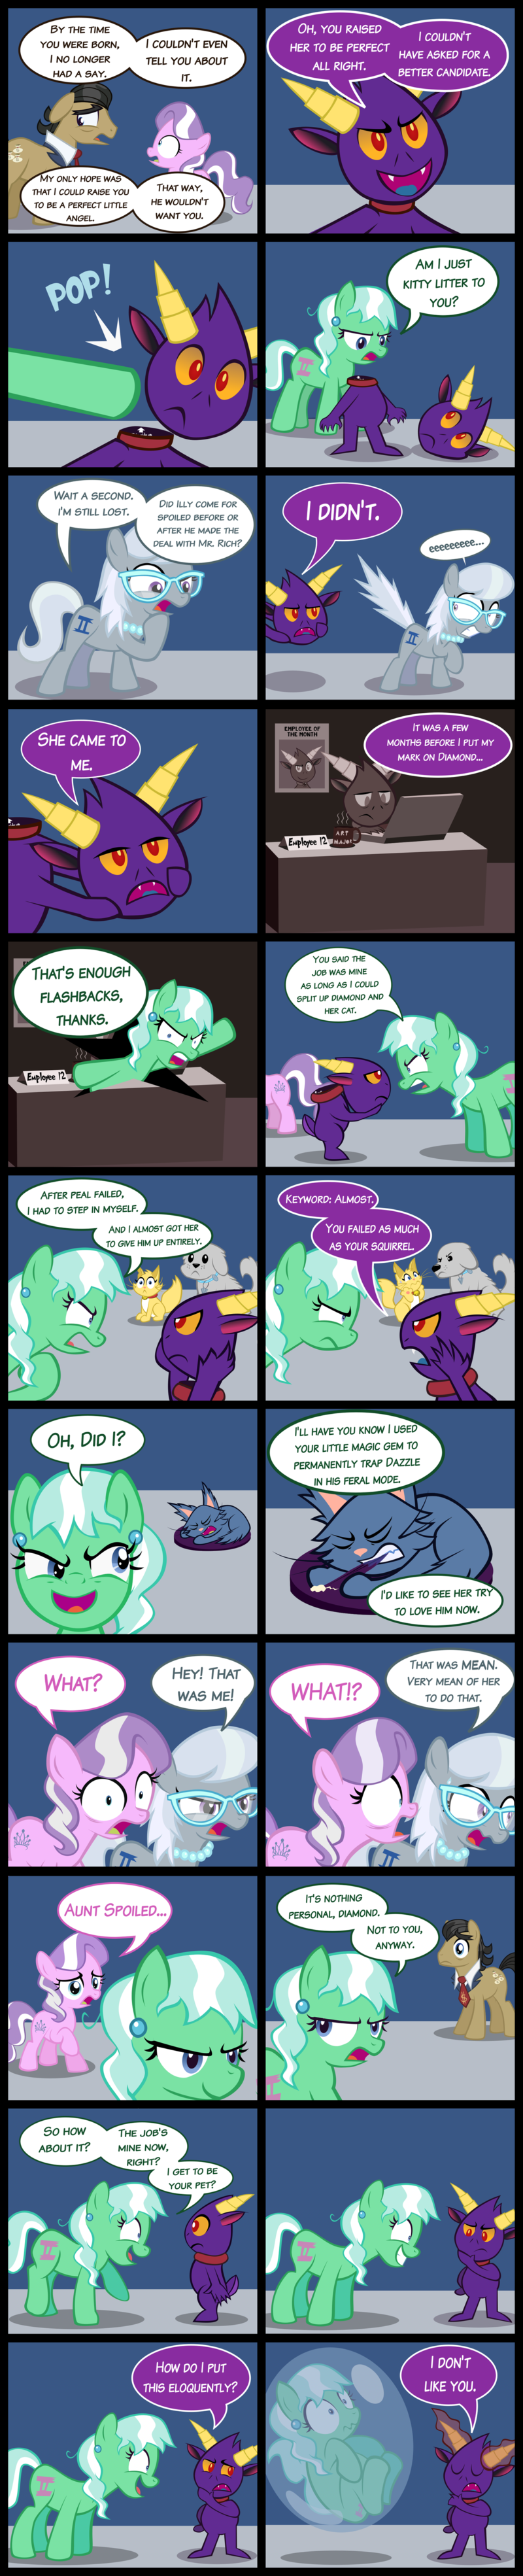 Page 119: Scapegoat